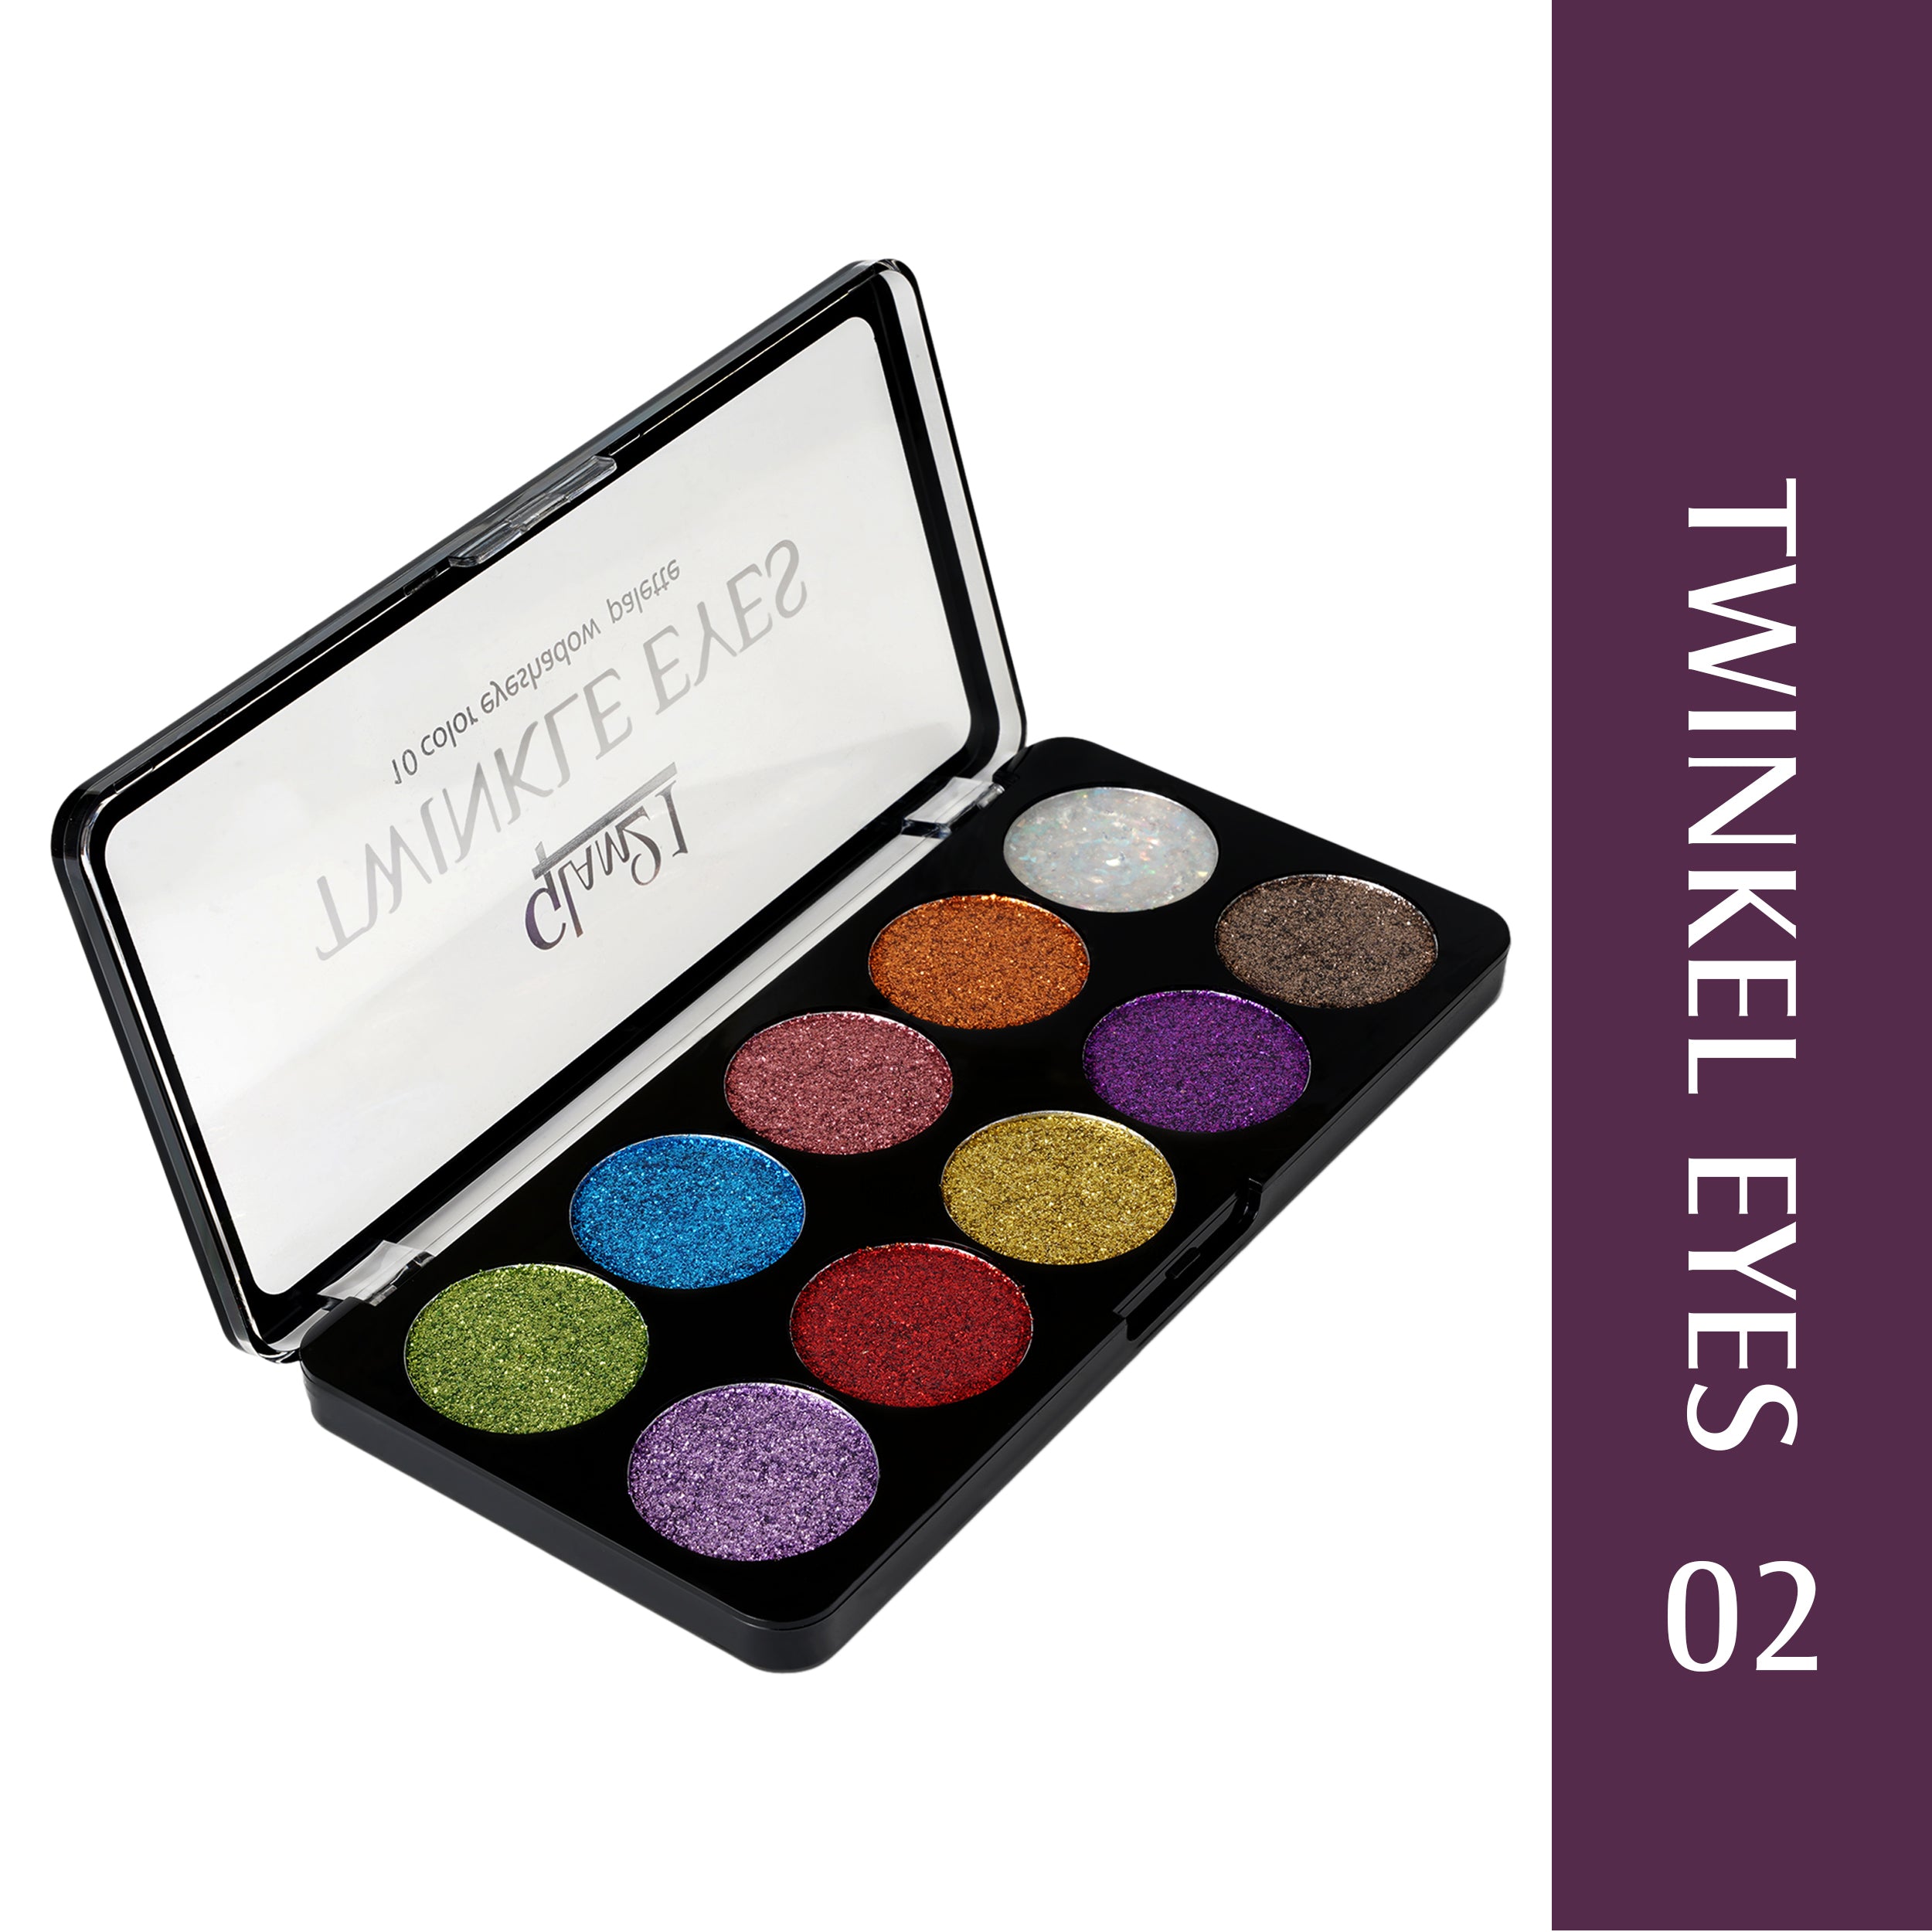 Glam21 Twinkle Eyes Glitter Palette|10 Cream Based Highly Pigmented Shades|Non Sticky Look -13gm-02-NA-13gm